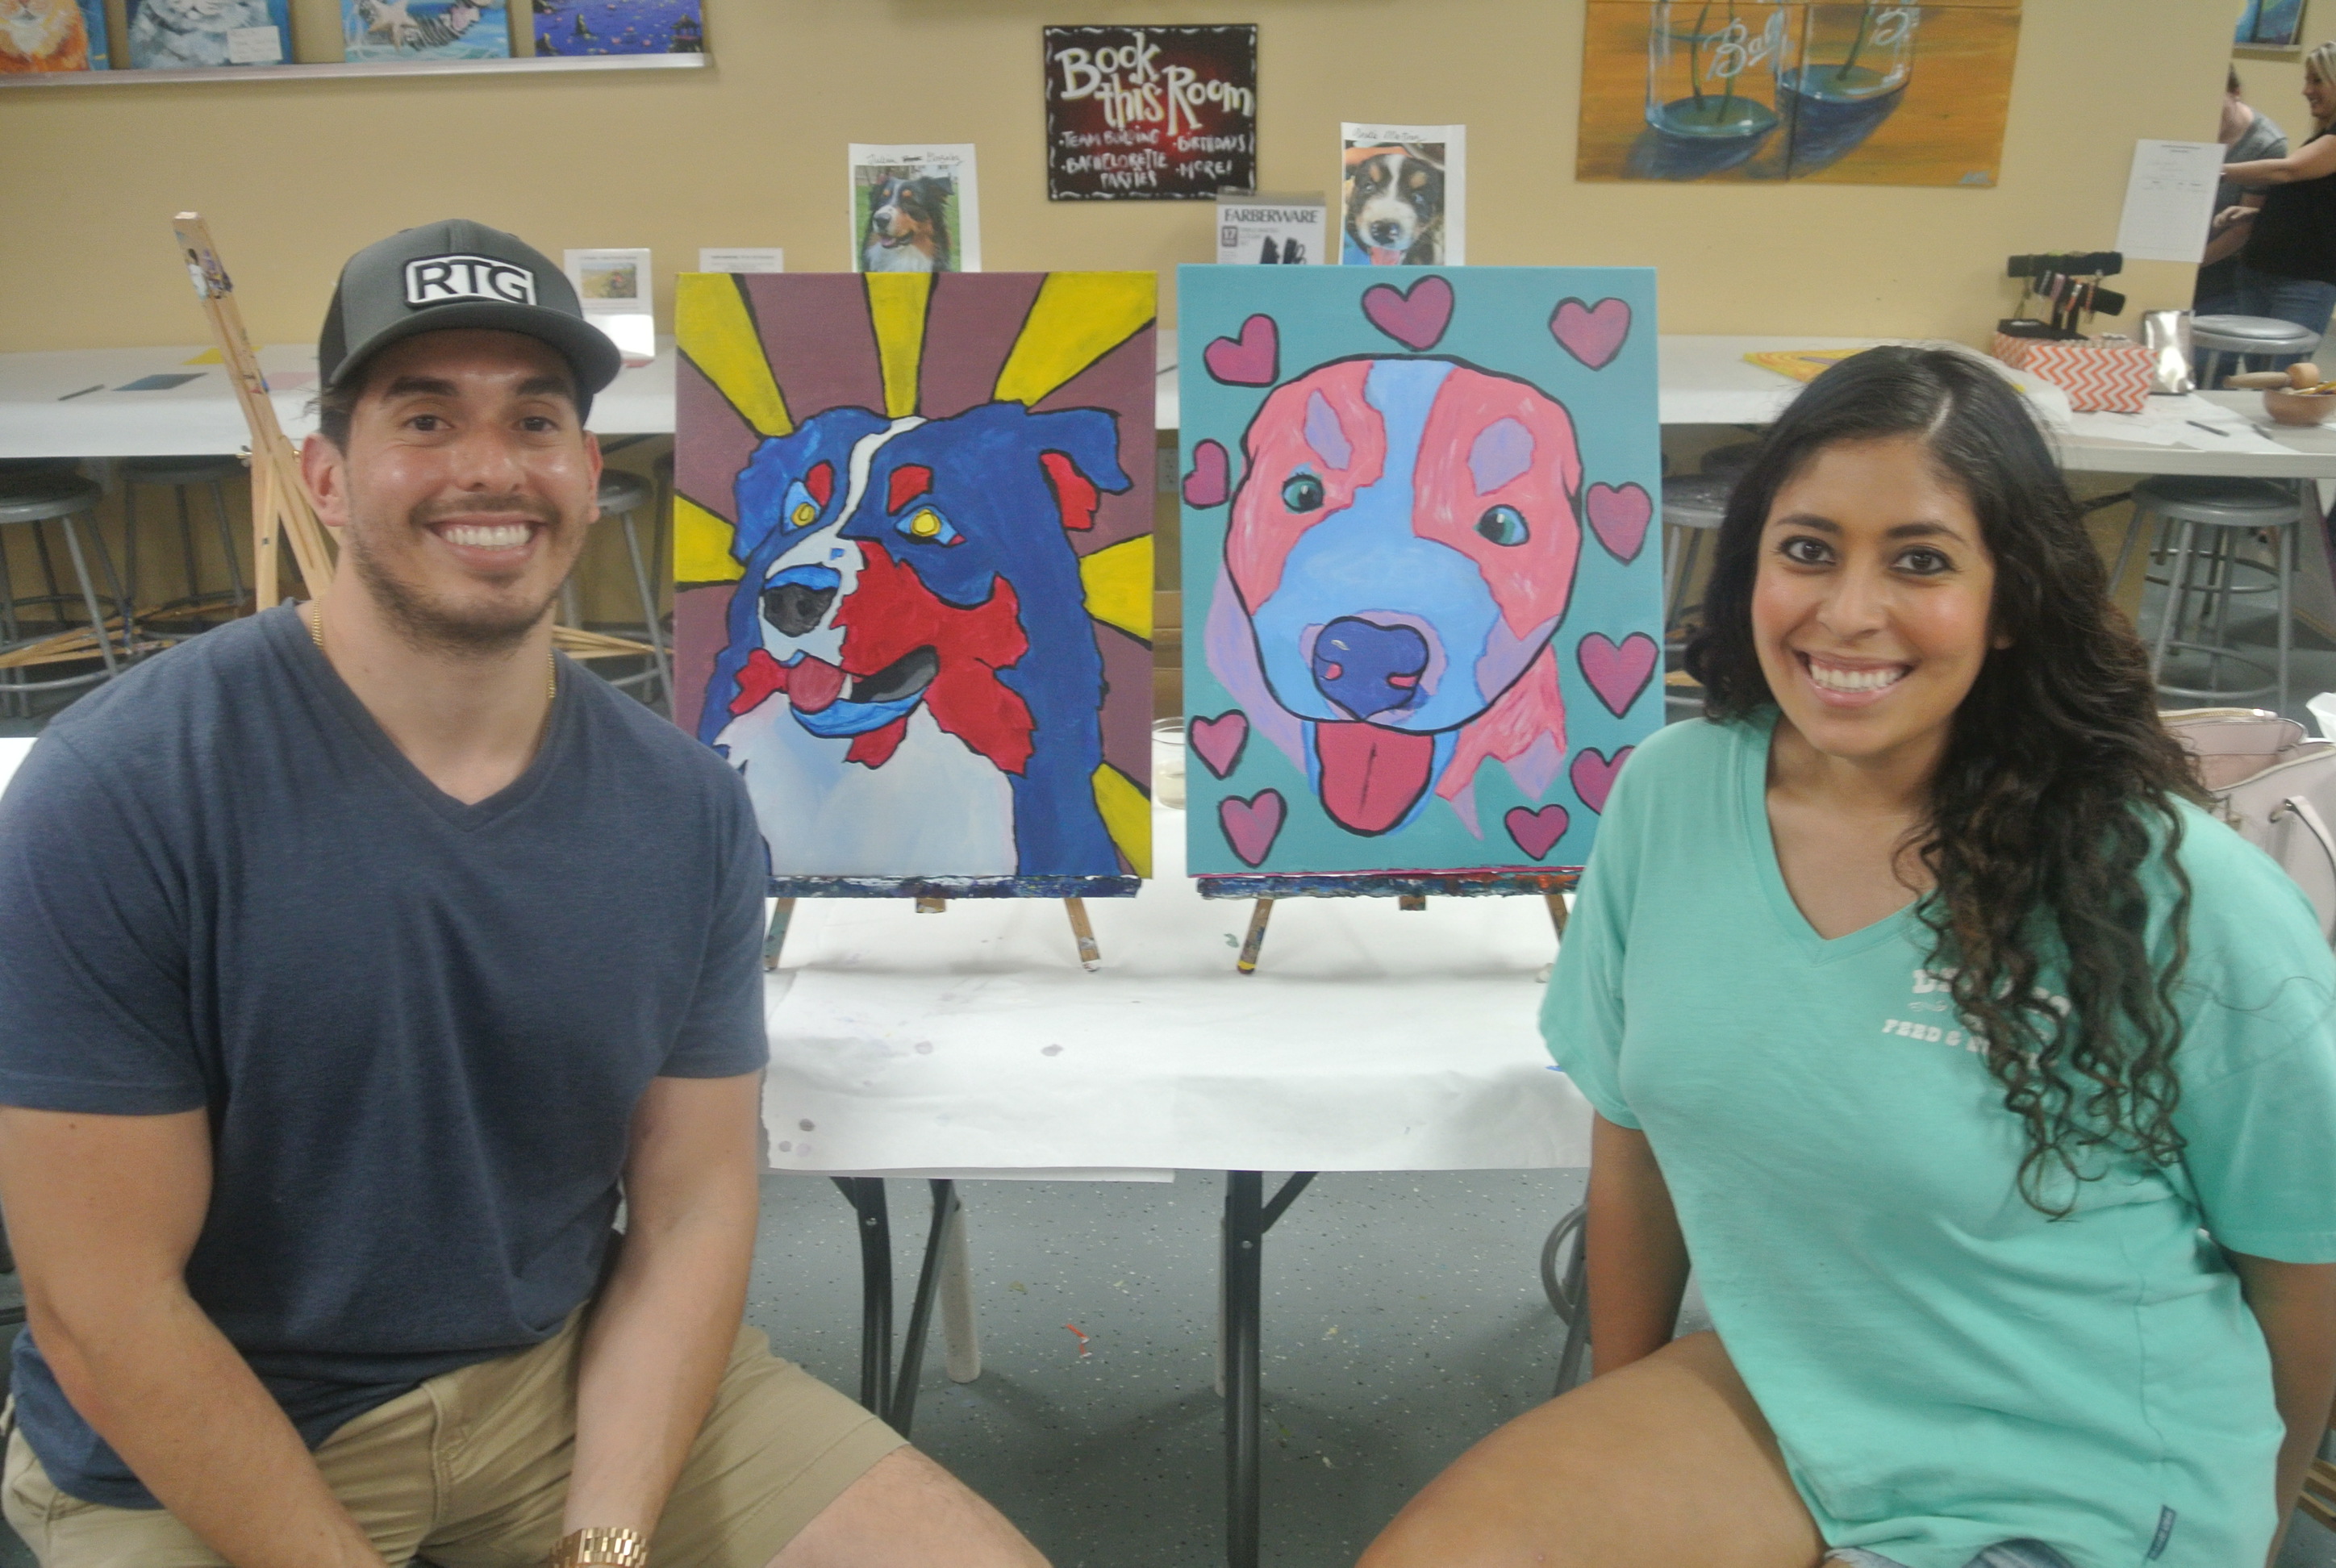 Date Night: Painting With A Twist [PLUS **GIVEAWAY**] - The Nueva Latina